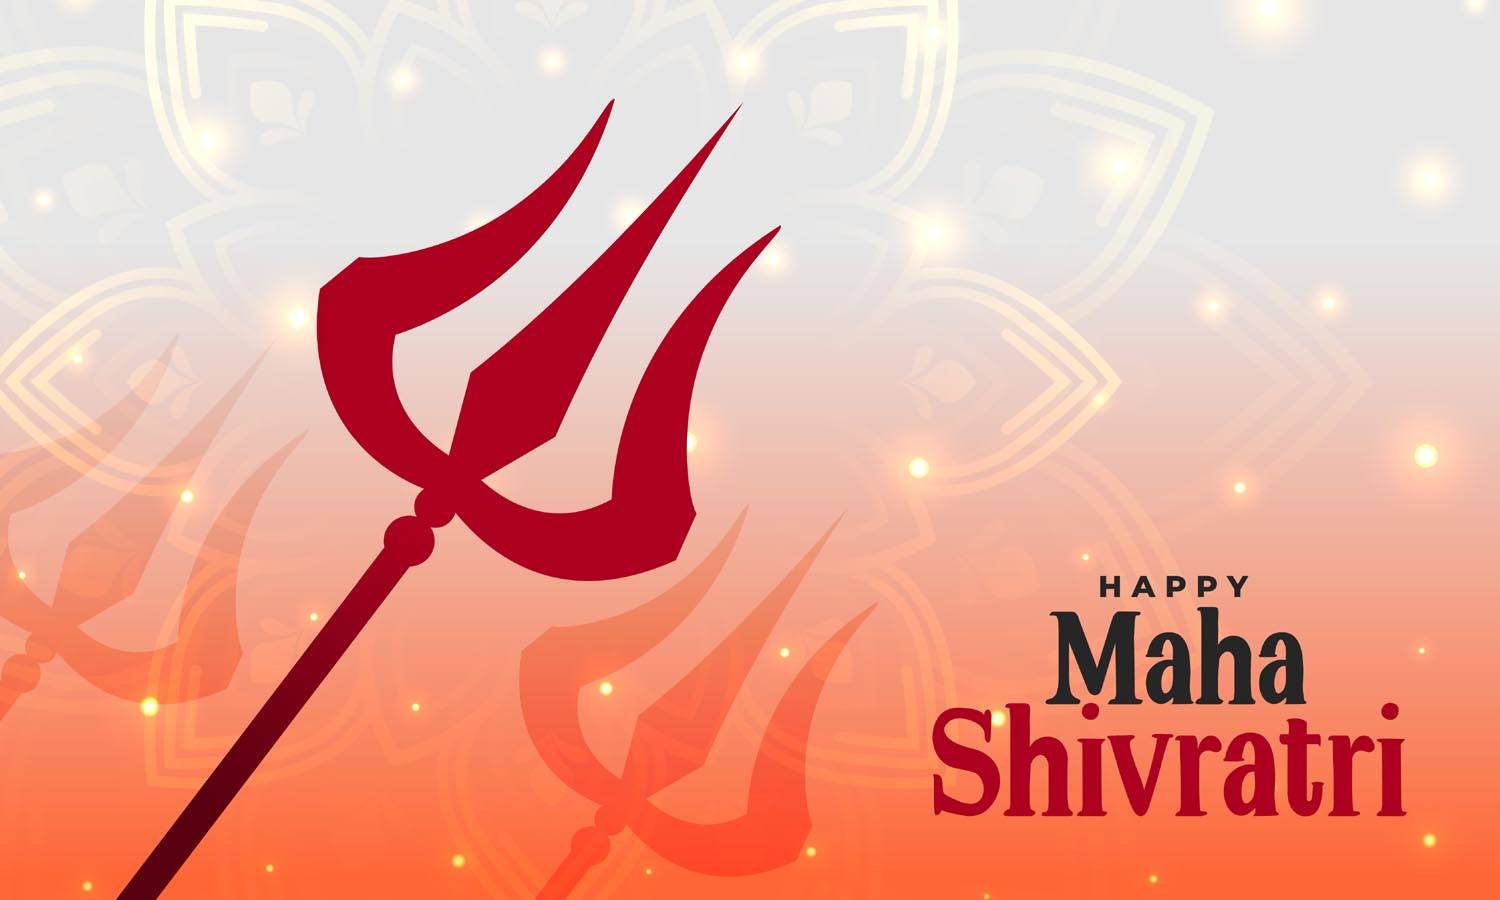 Maha Shivratri Wishes Messages for Girlfriend and Boyfriend